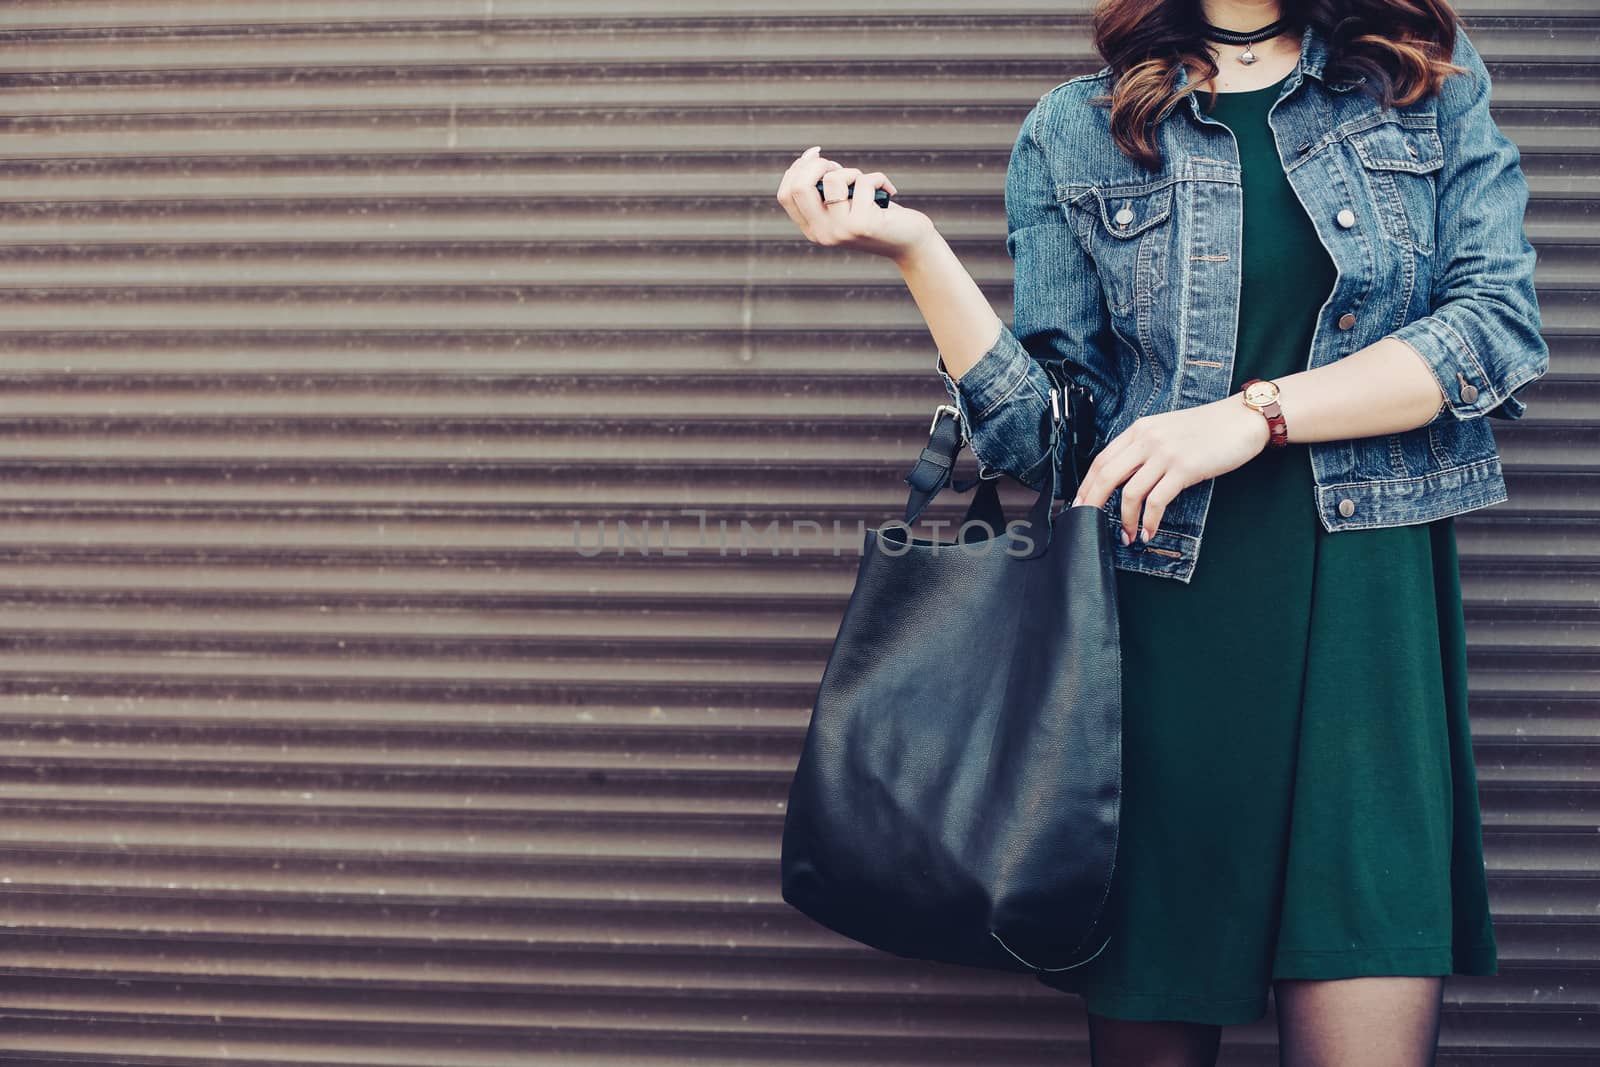 Crop of stylish incognito girl with big black leather bag after shopping, posing at street, leaning on wall. Woman in dress, jeans jacket, with accessories. Street fashion.